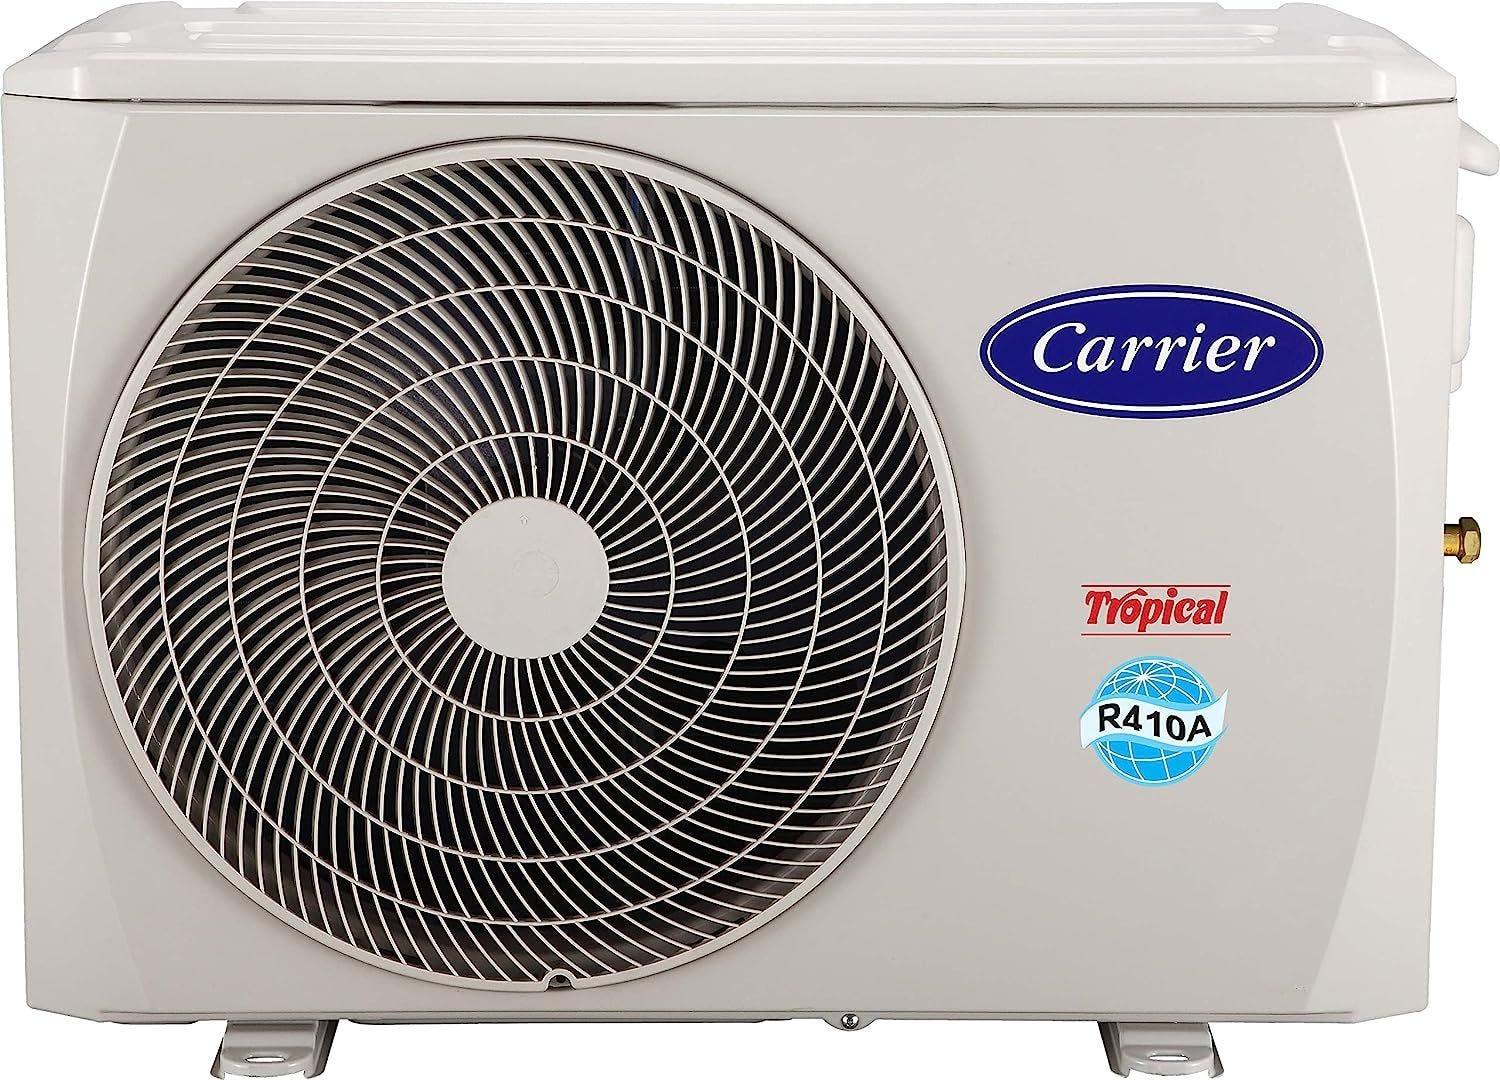 Carrier Optimax Pro Digital Split Air Conditioner With Plasma Function, 5 HP, Cooling & Heating, White - QHCT36N - EStores